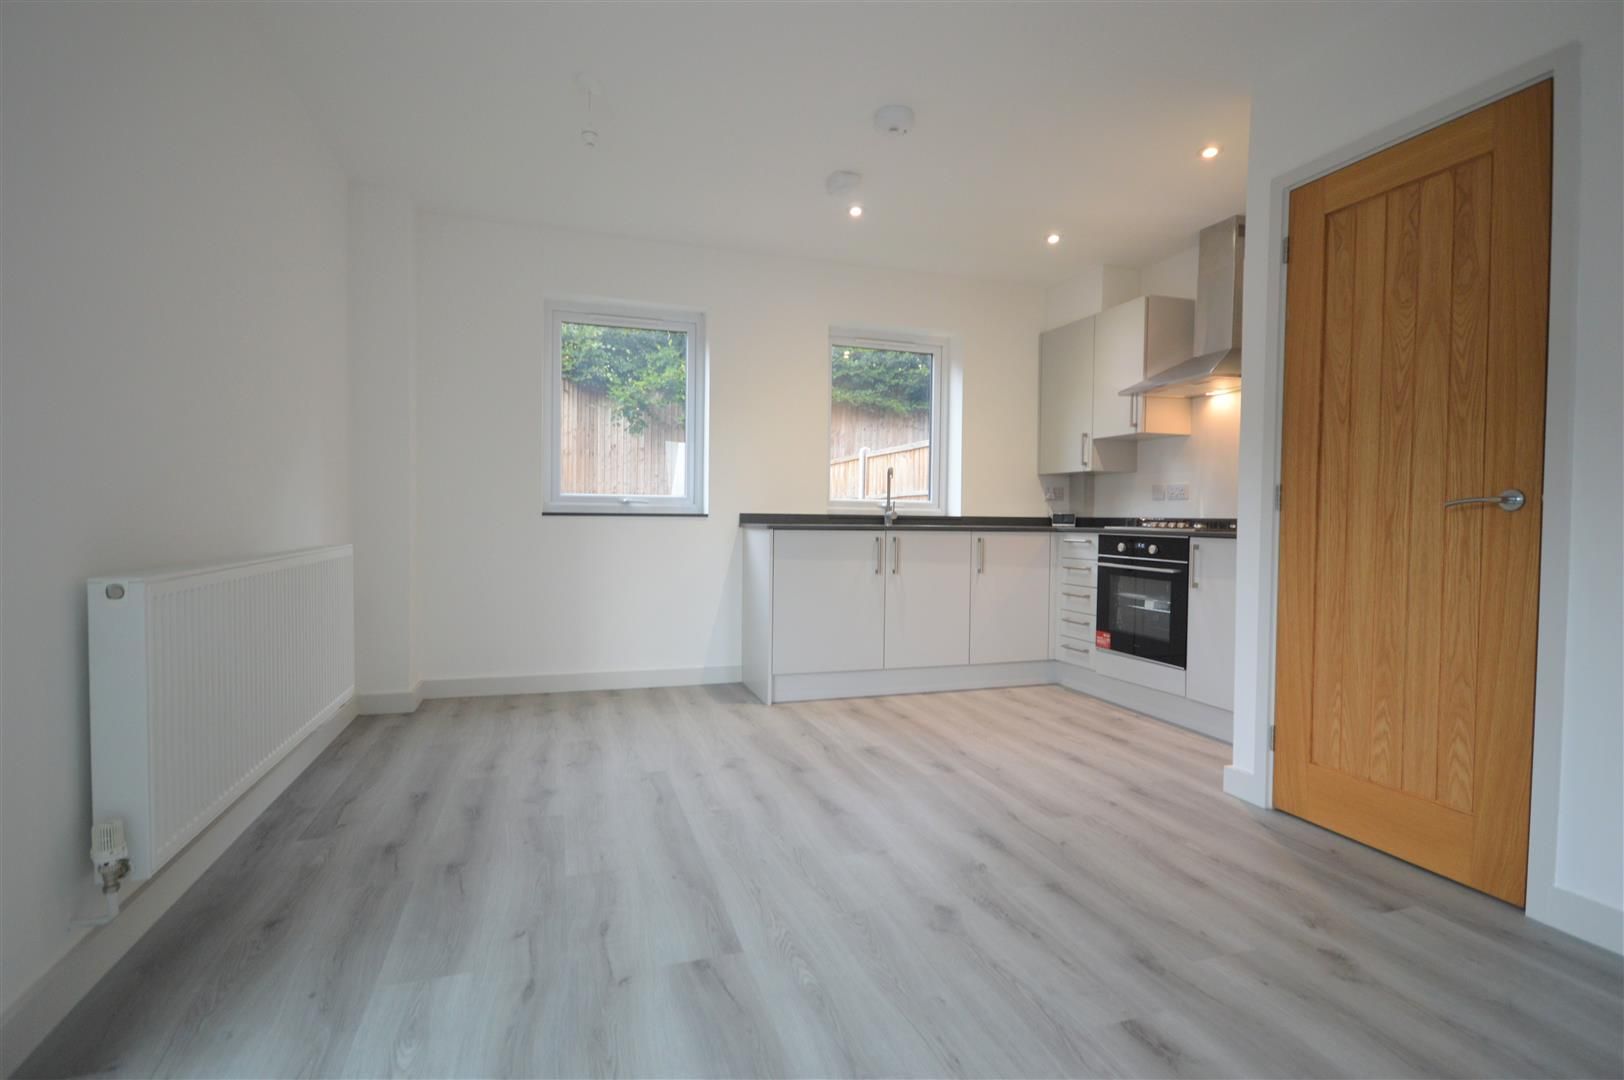 2 bed semi-detached for sale in Leominster 2